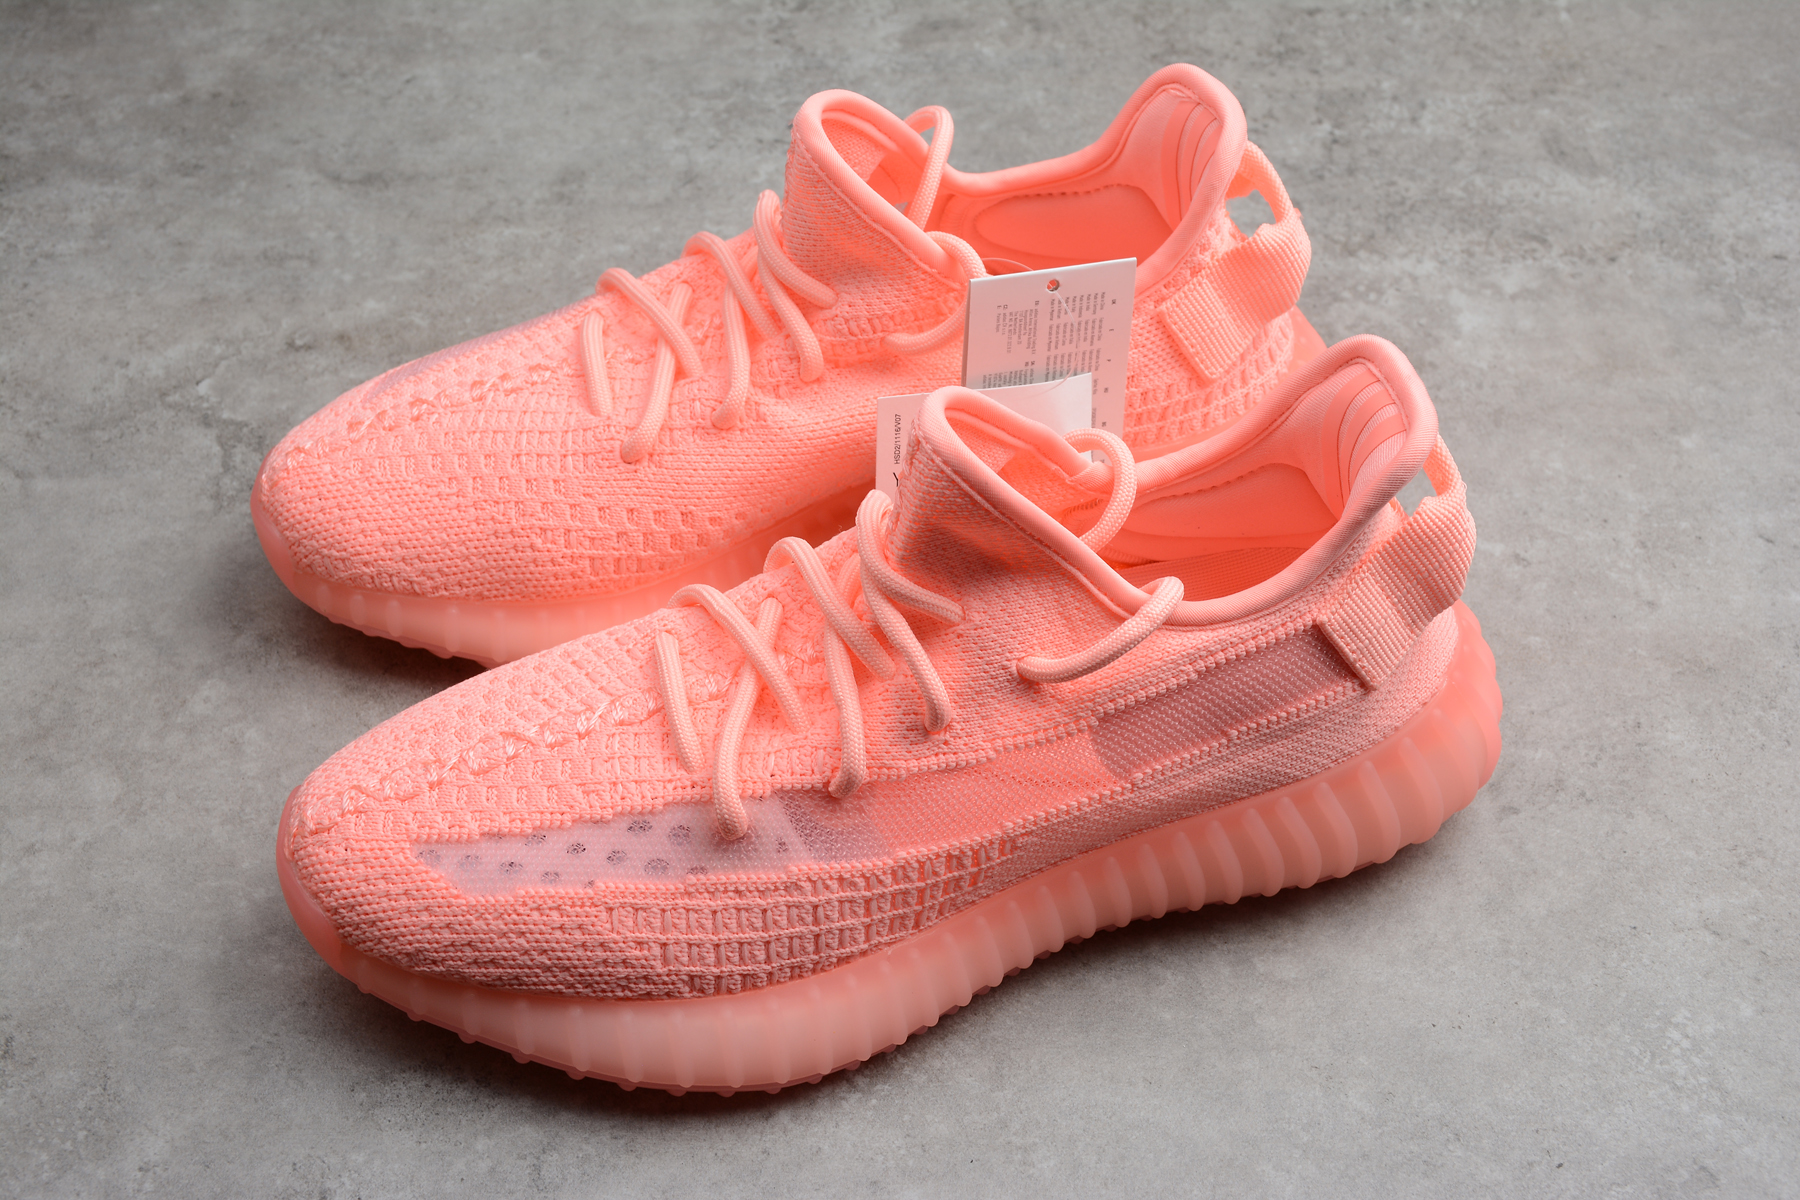 yeezy shoes pink